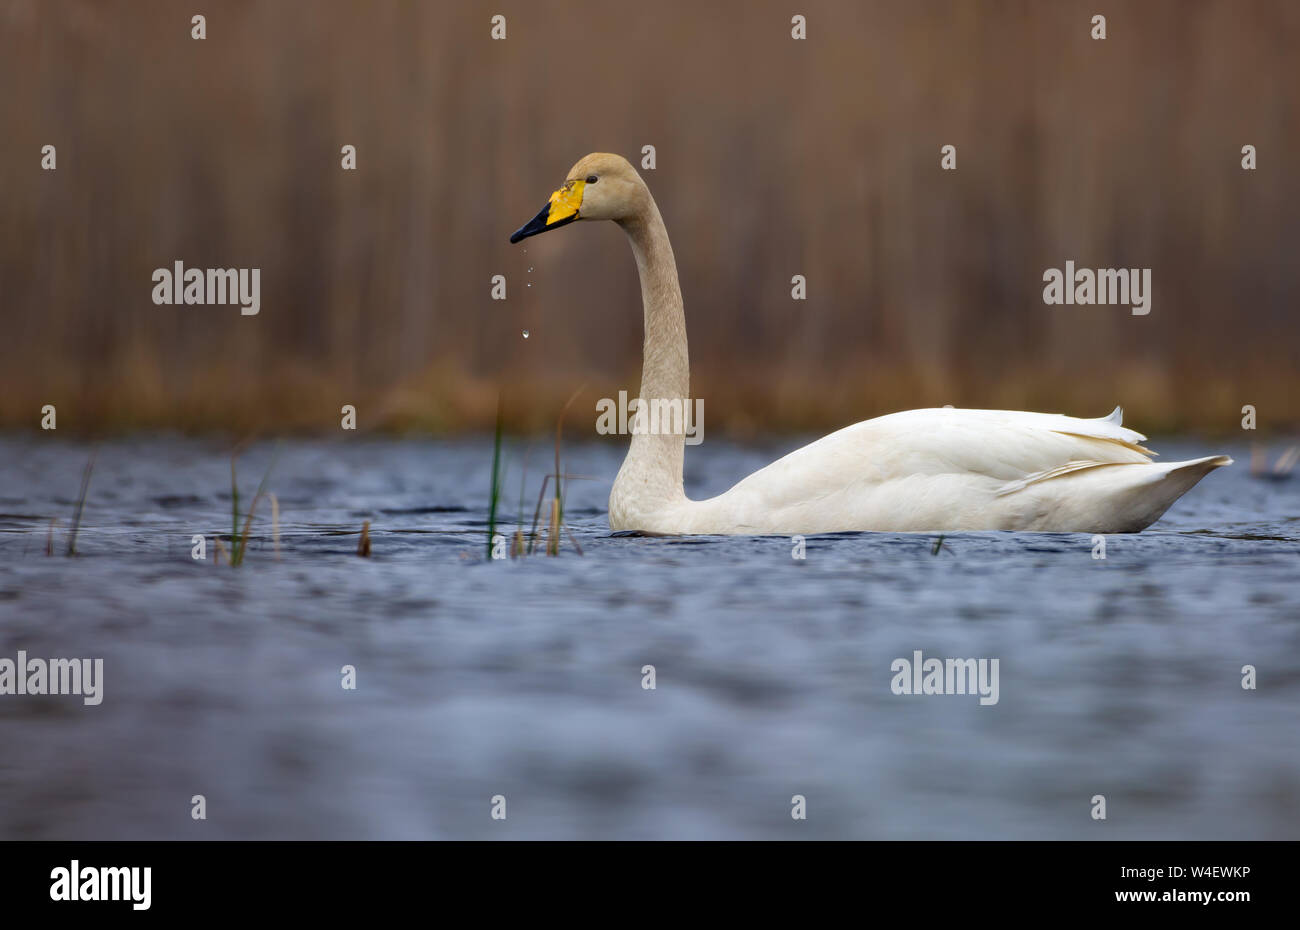 Adult Whooper swan swims on lake surface with water droplets falling from his beak Stock Photo